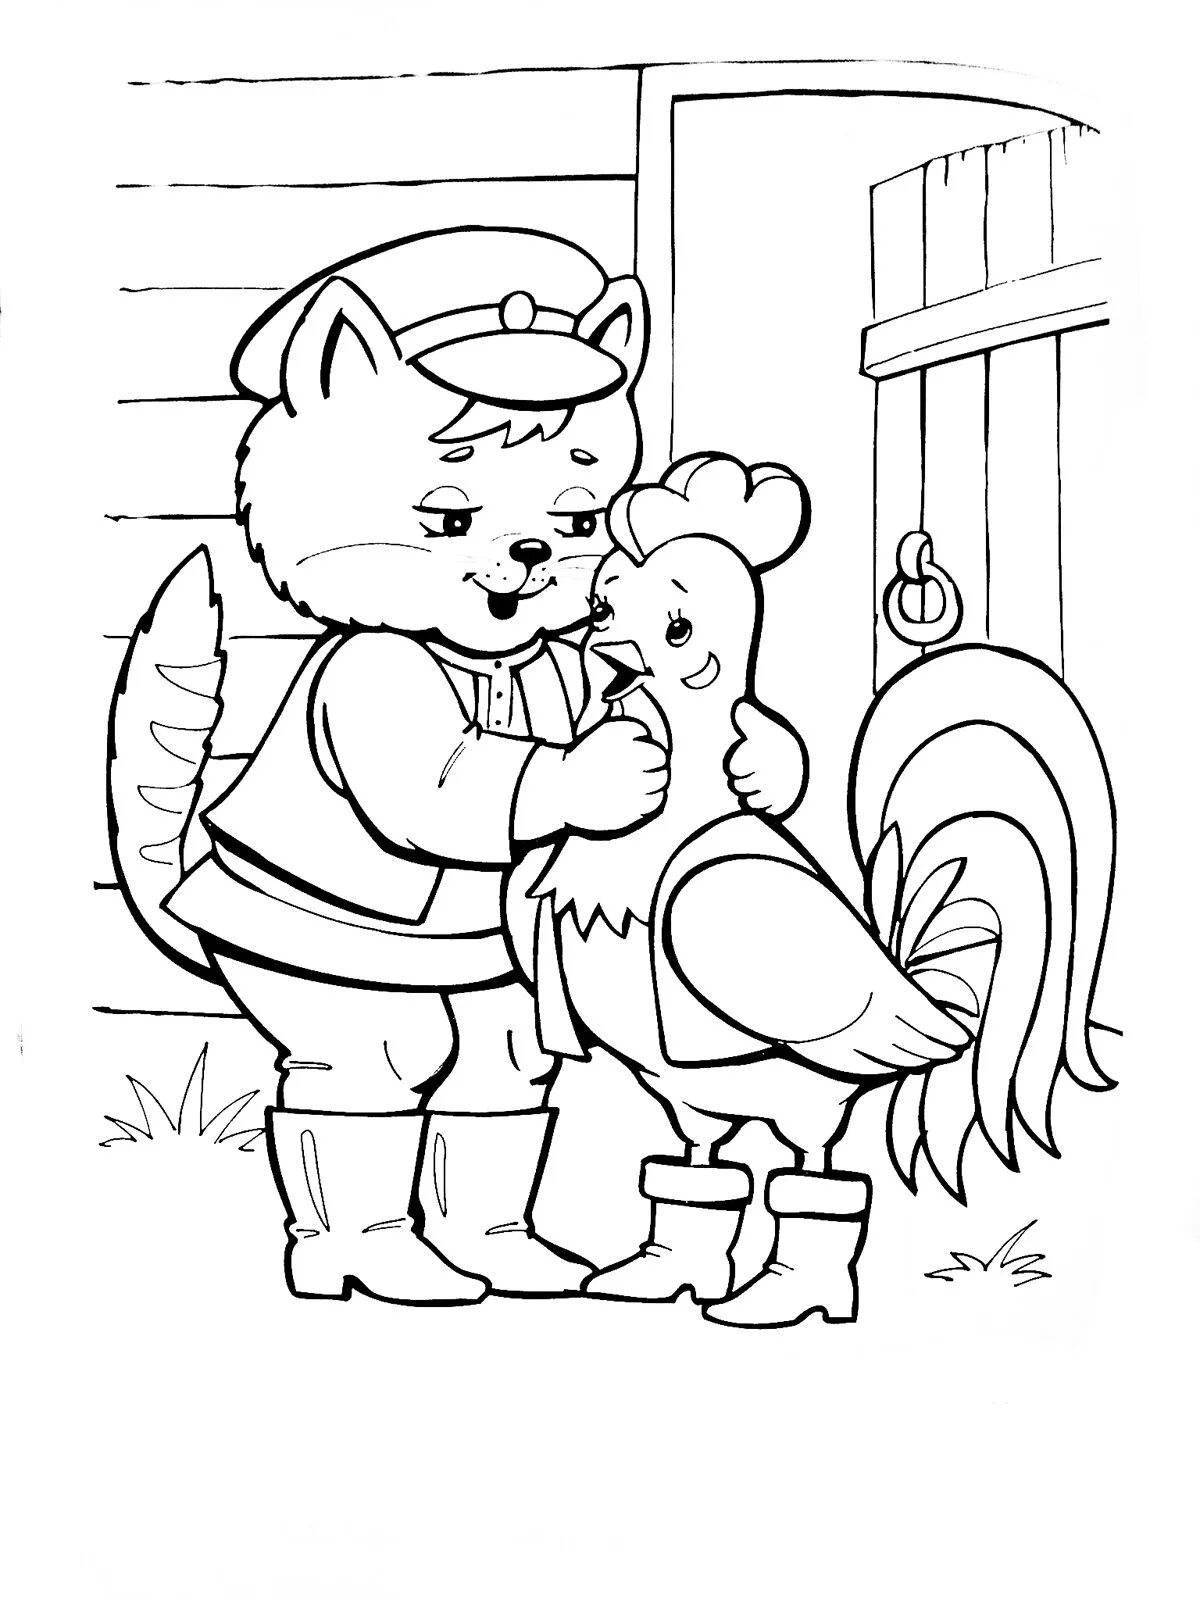 Coloring page inviting Russian folk tales